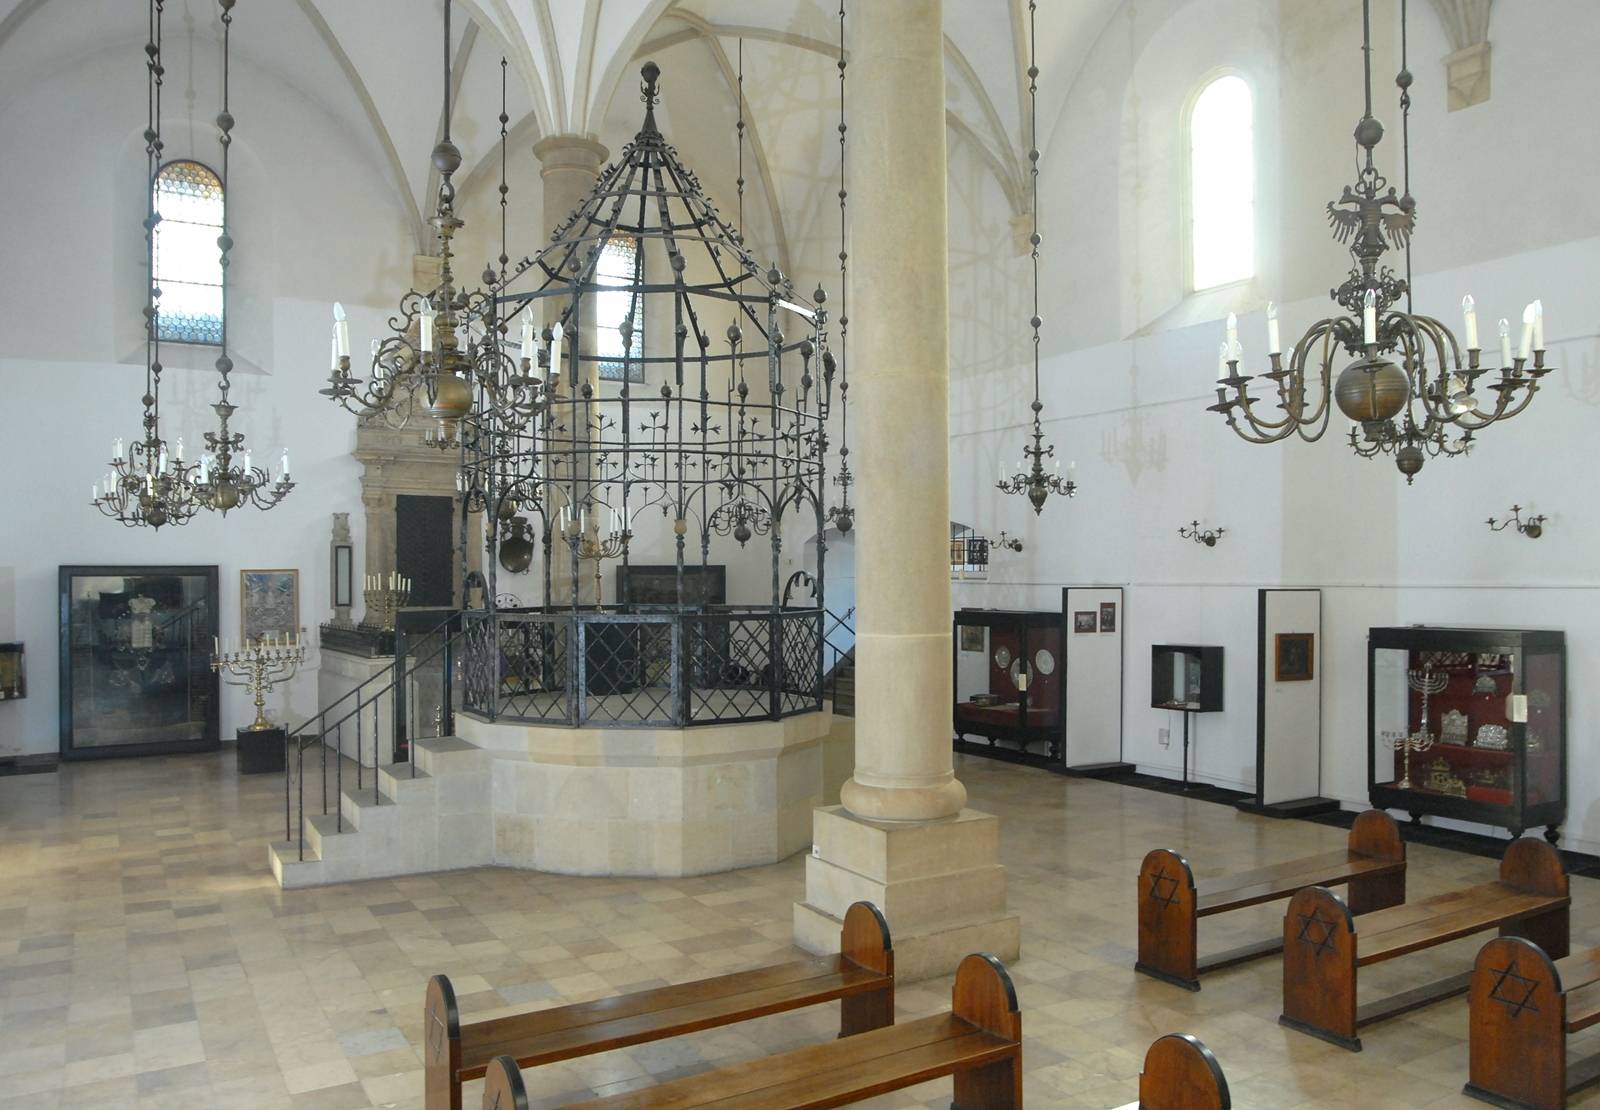 The history and Culture of Jews in Kraków